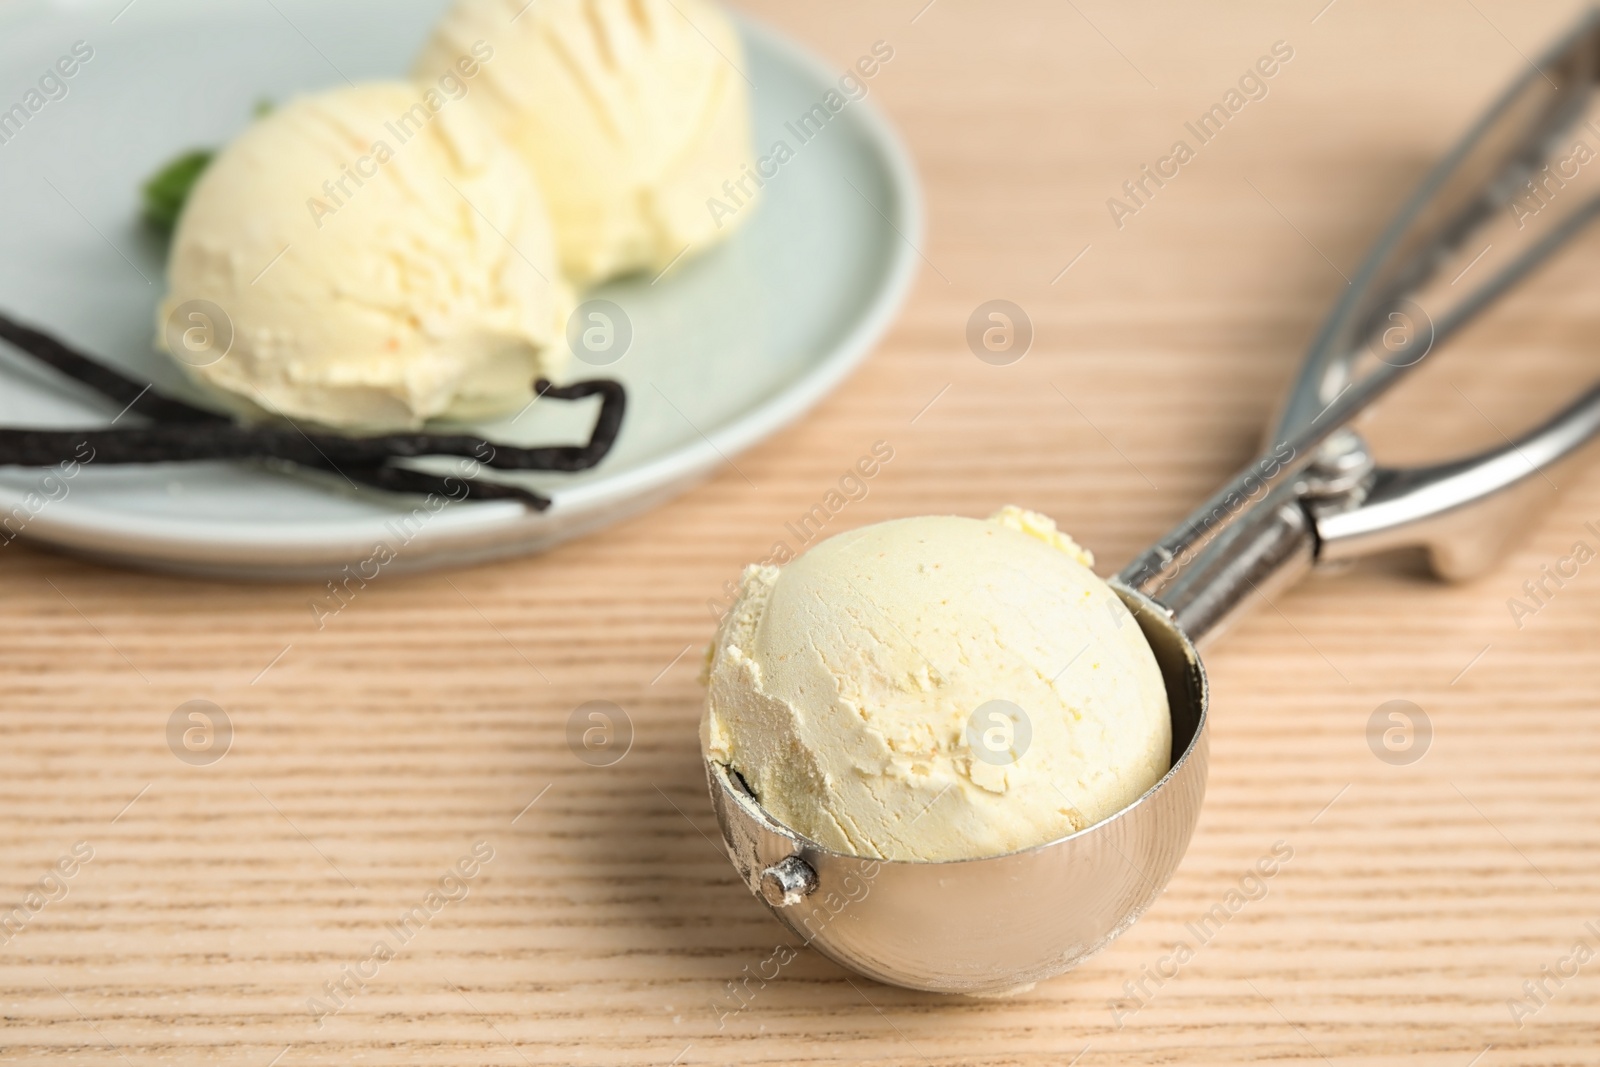 Photo of Scoop with delicious vanilla ice cream near plate on wooden table